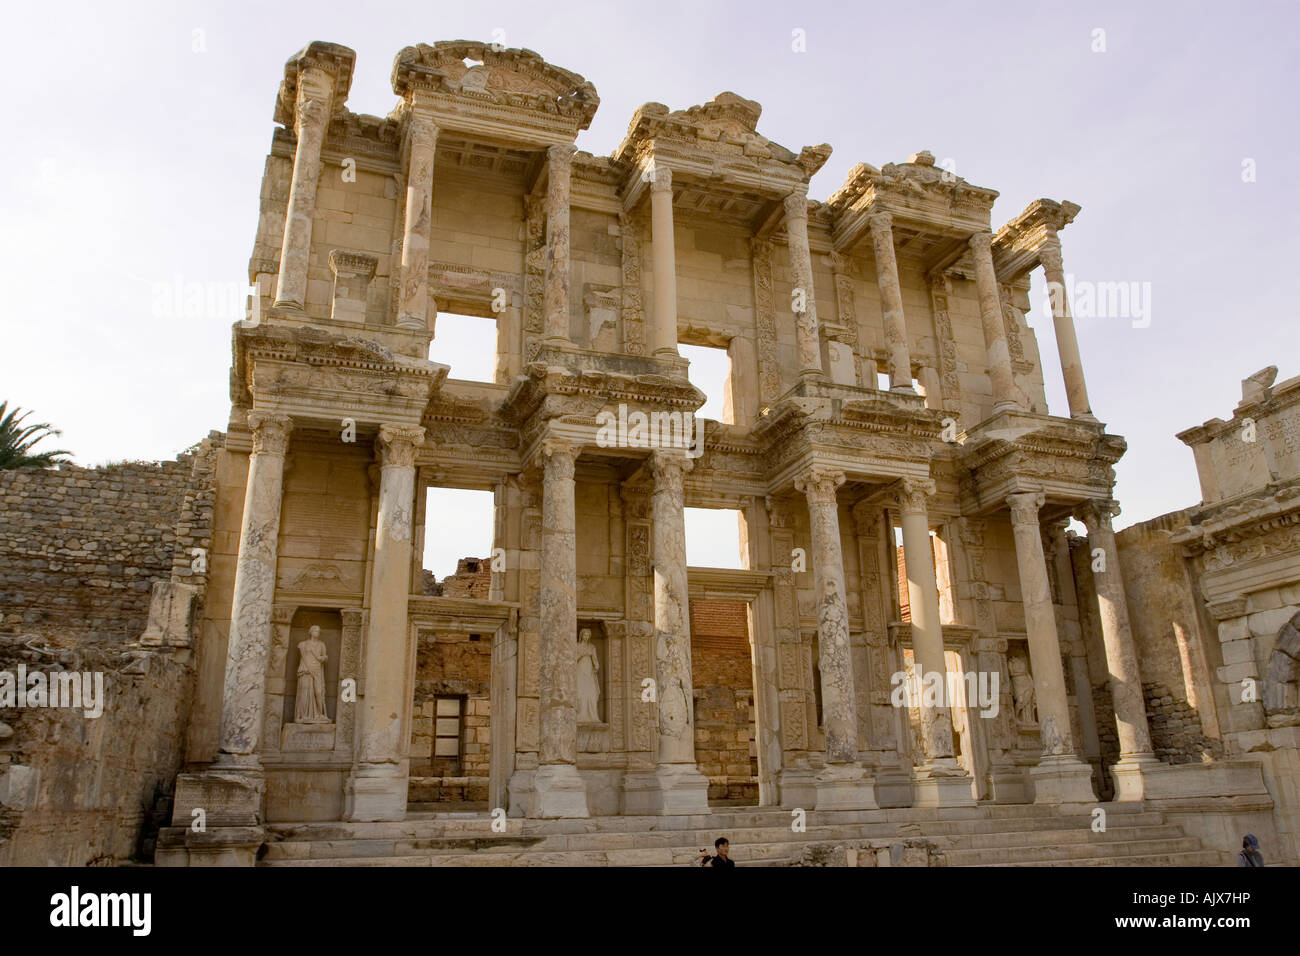 Celcus Library in Ephesus - the Ionian city in ancient Anatolia, now Turkey. Stock Photo